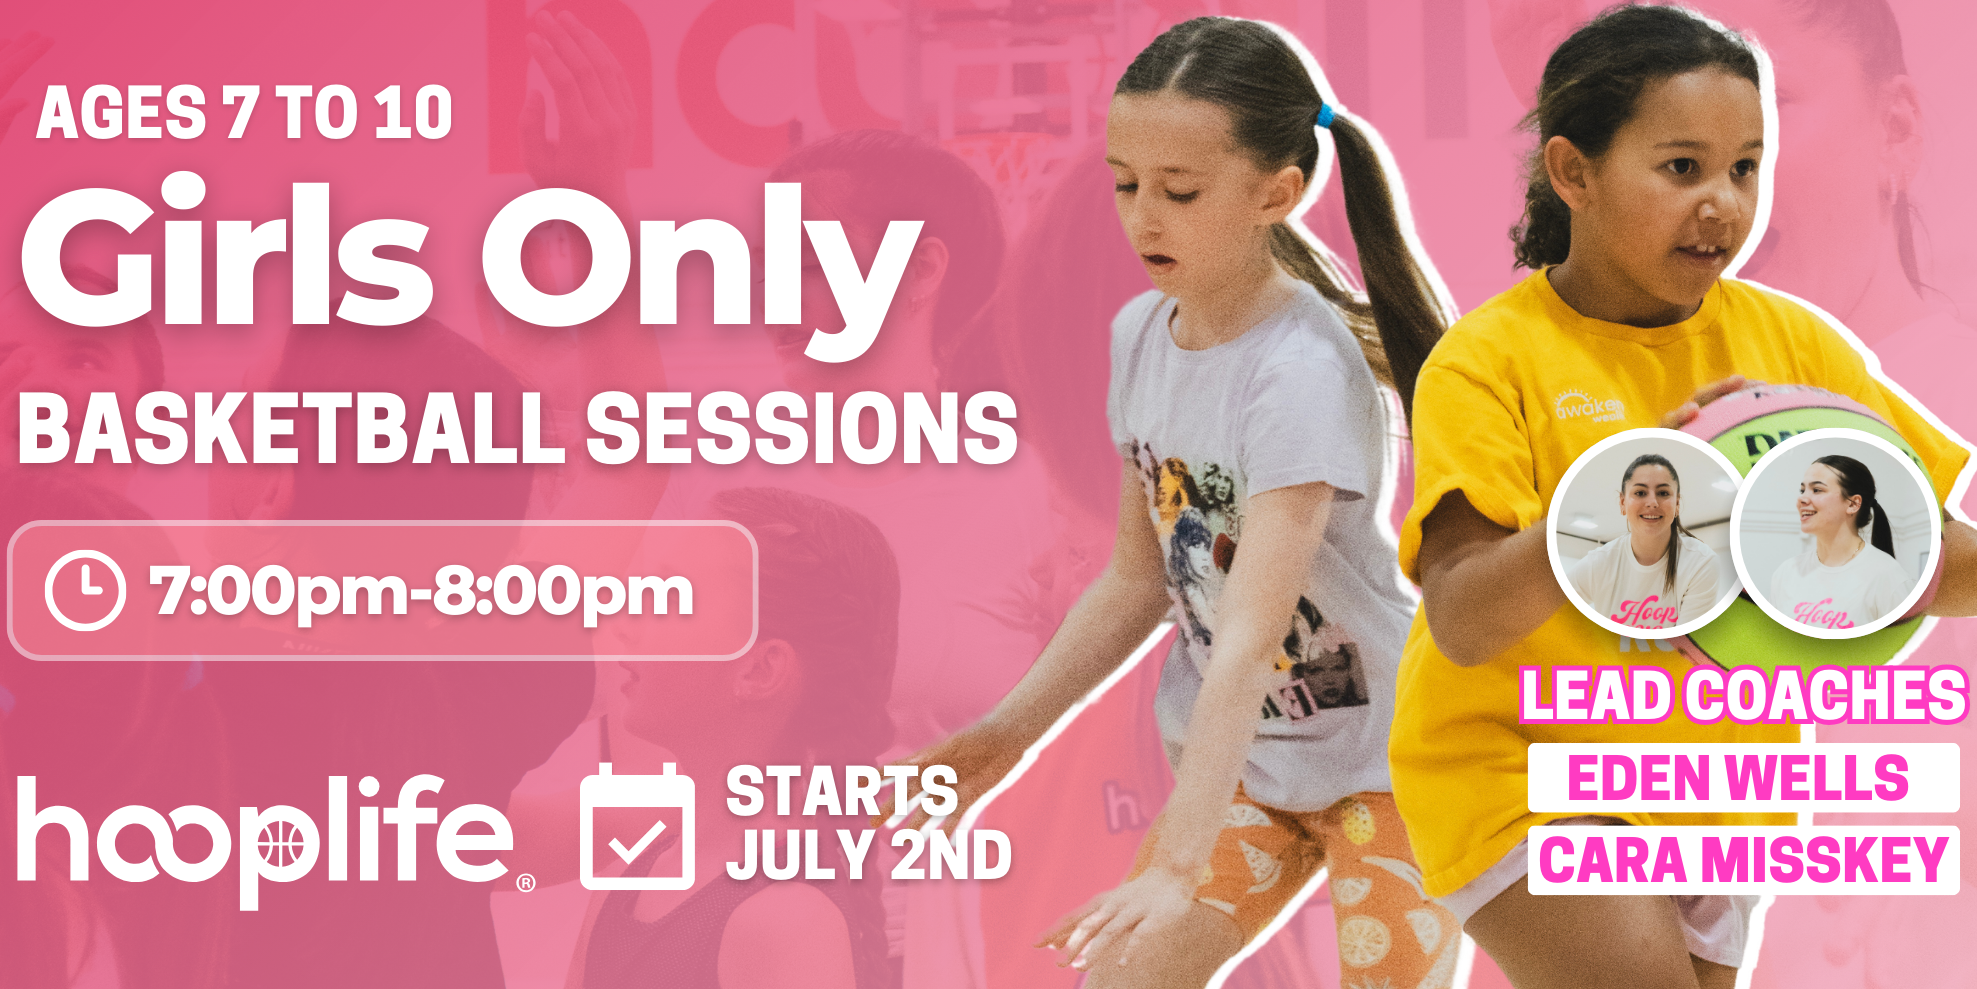 Ages 7-10 Girls Only Basketball Session 